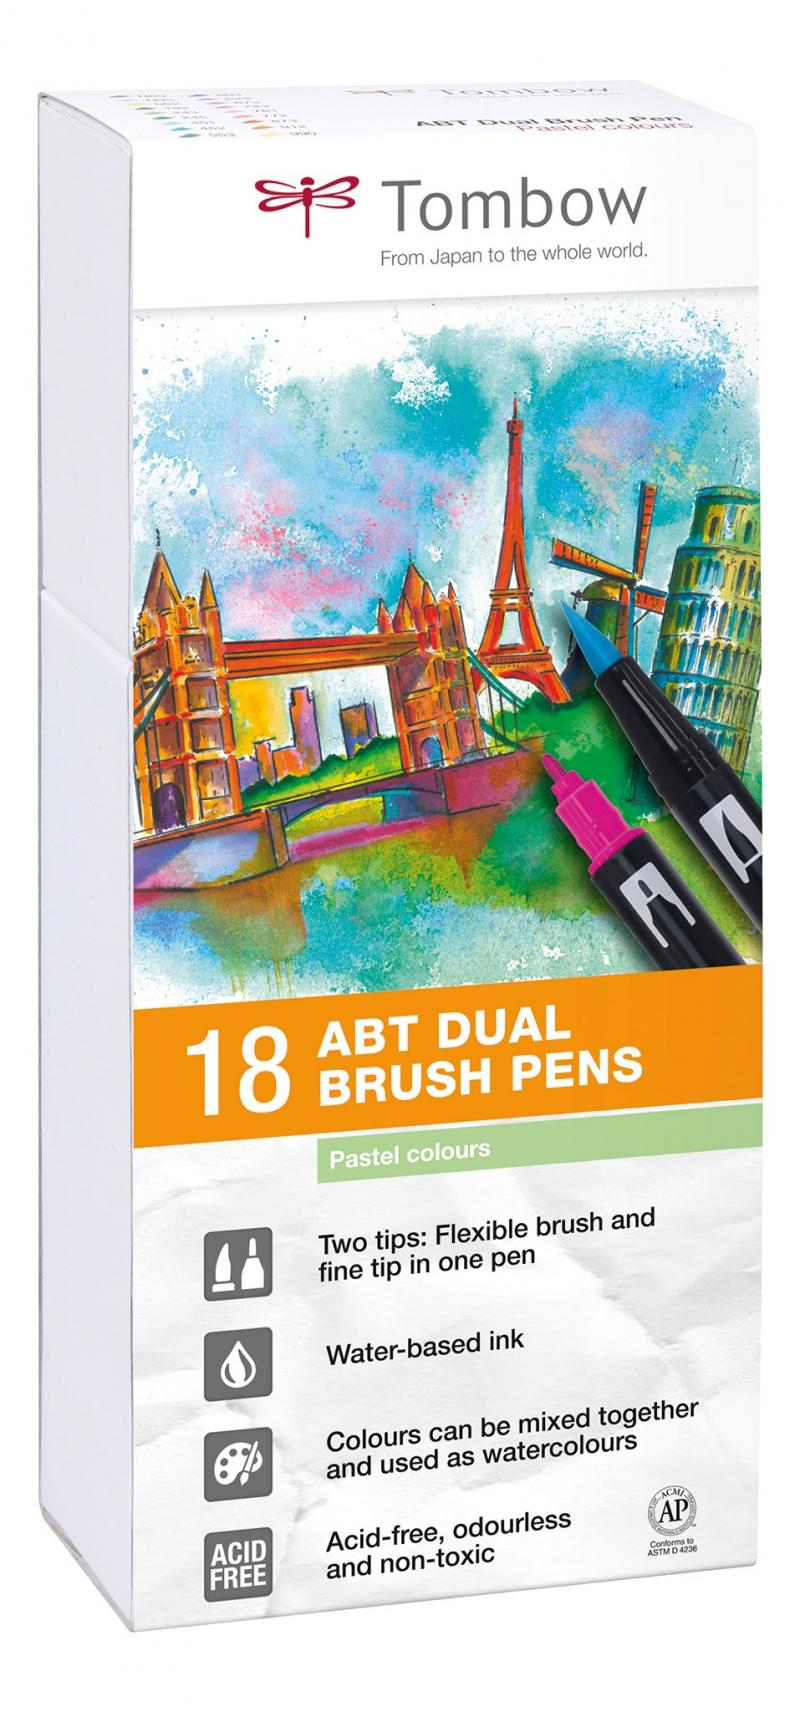 Markers Dual Brush 18P-5 Pastel st, Tombow ABT-18P-5